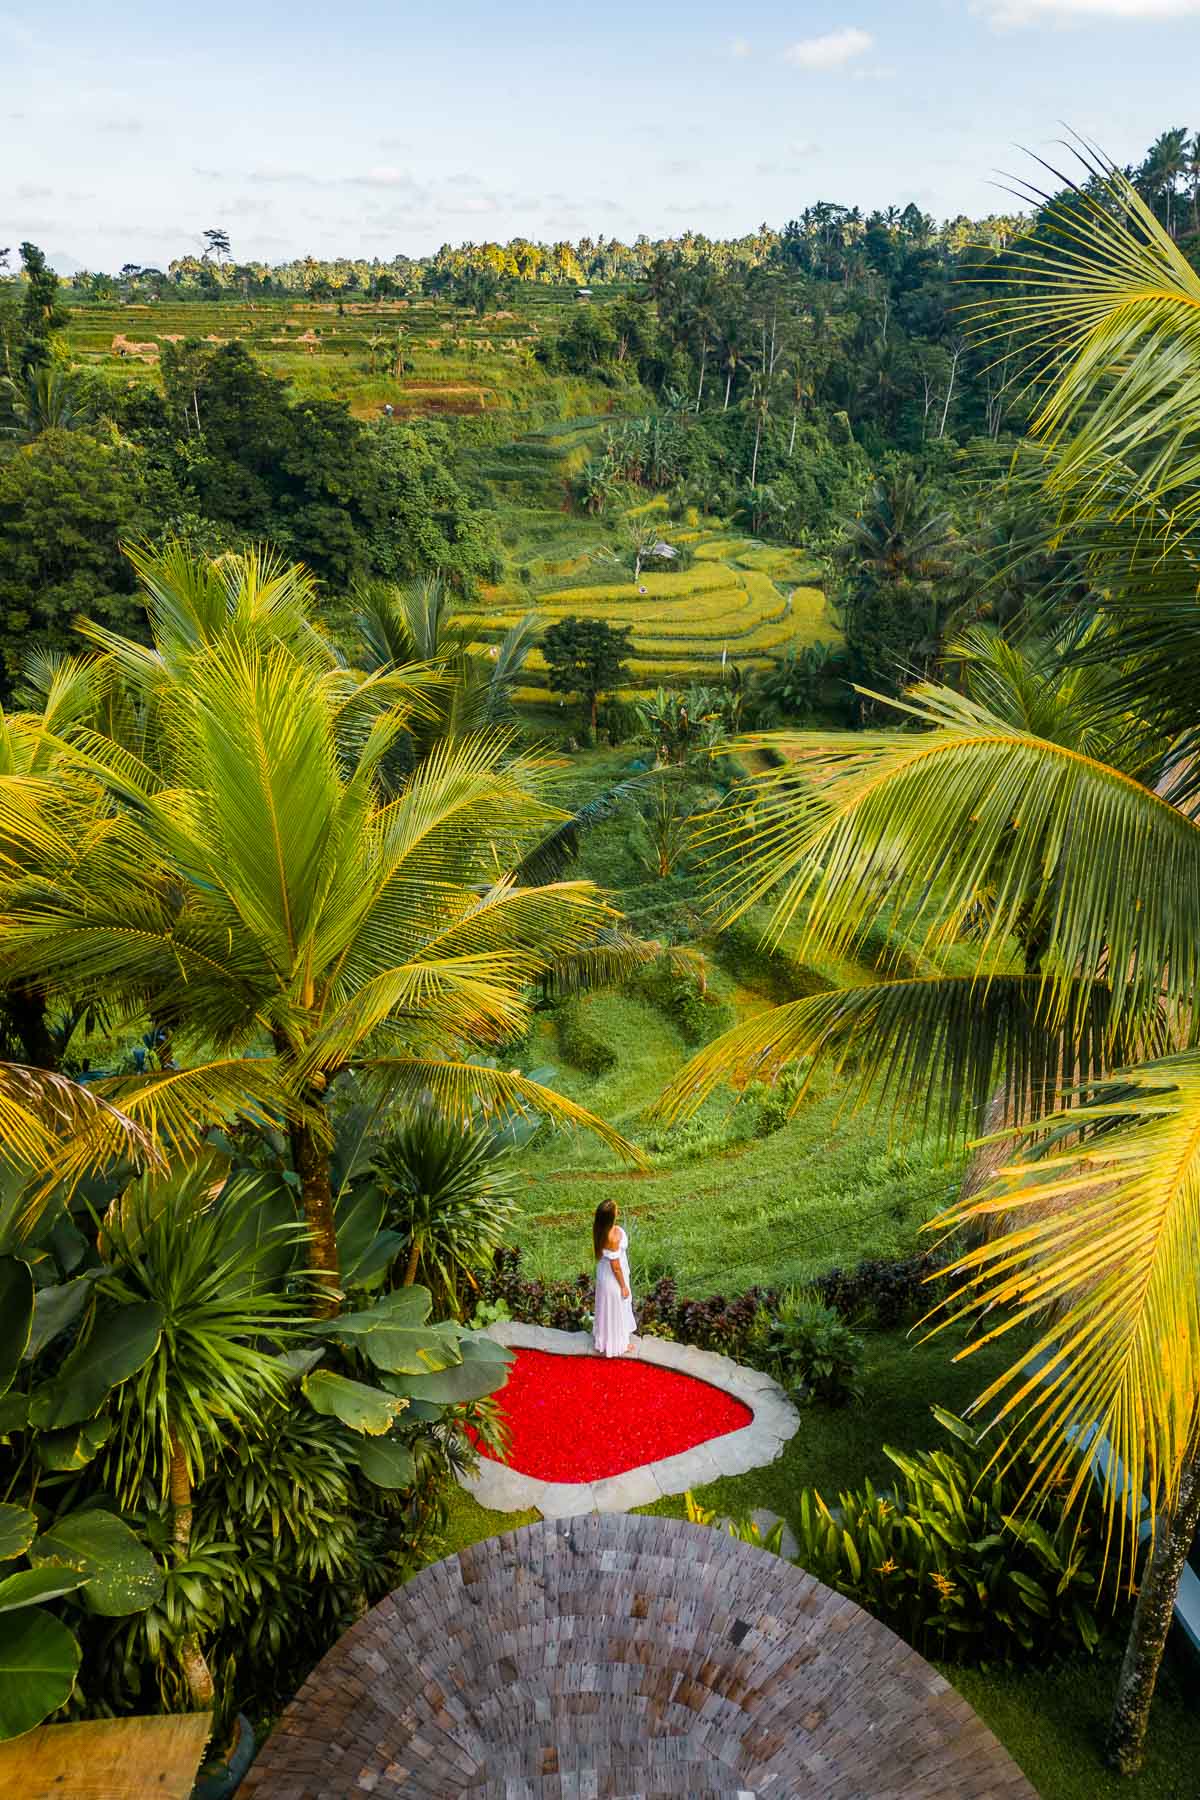 Girl by the hot tub filled with red flower petals at Camaya Bali Pyramid House